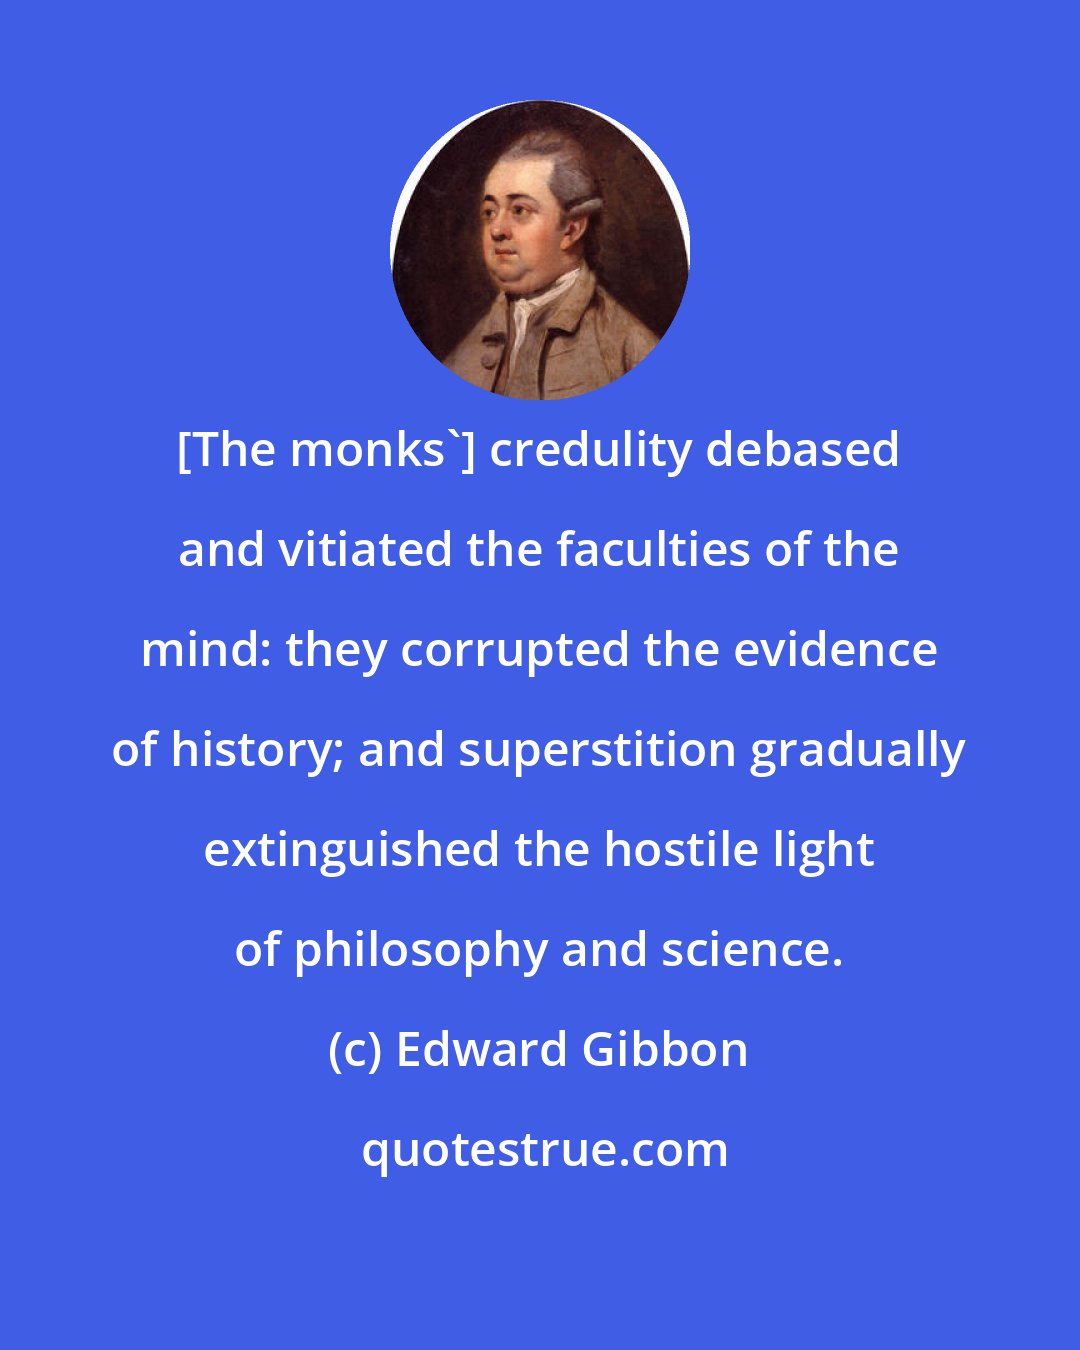 Edward Gibbon: [The monks'] credulity debased and vitiated the faculties of the mind: they corrupted the evidence of history; and superstition gradually extinguished the hostile light of philosophy and science.